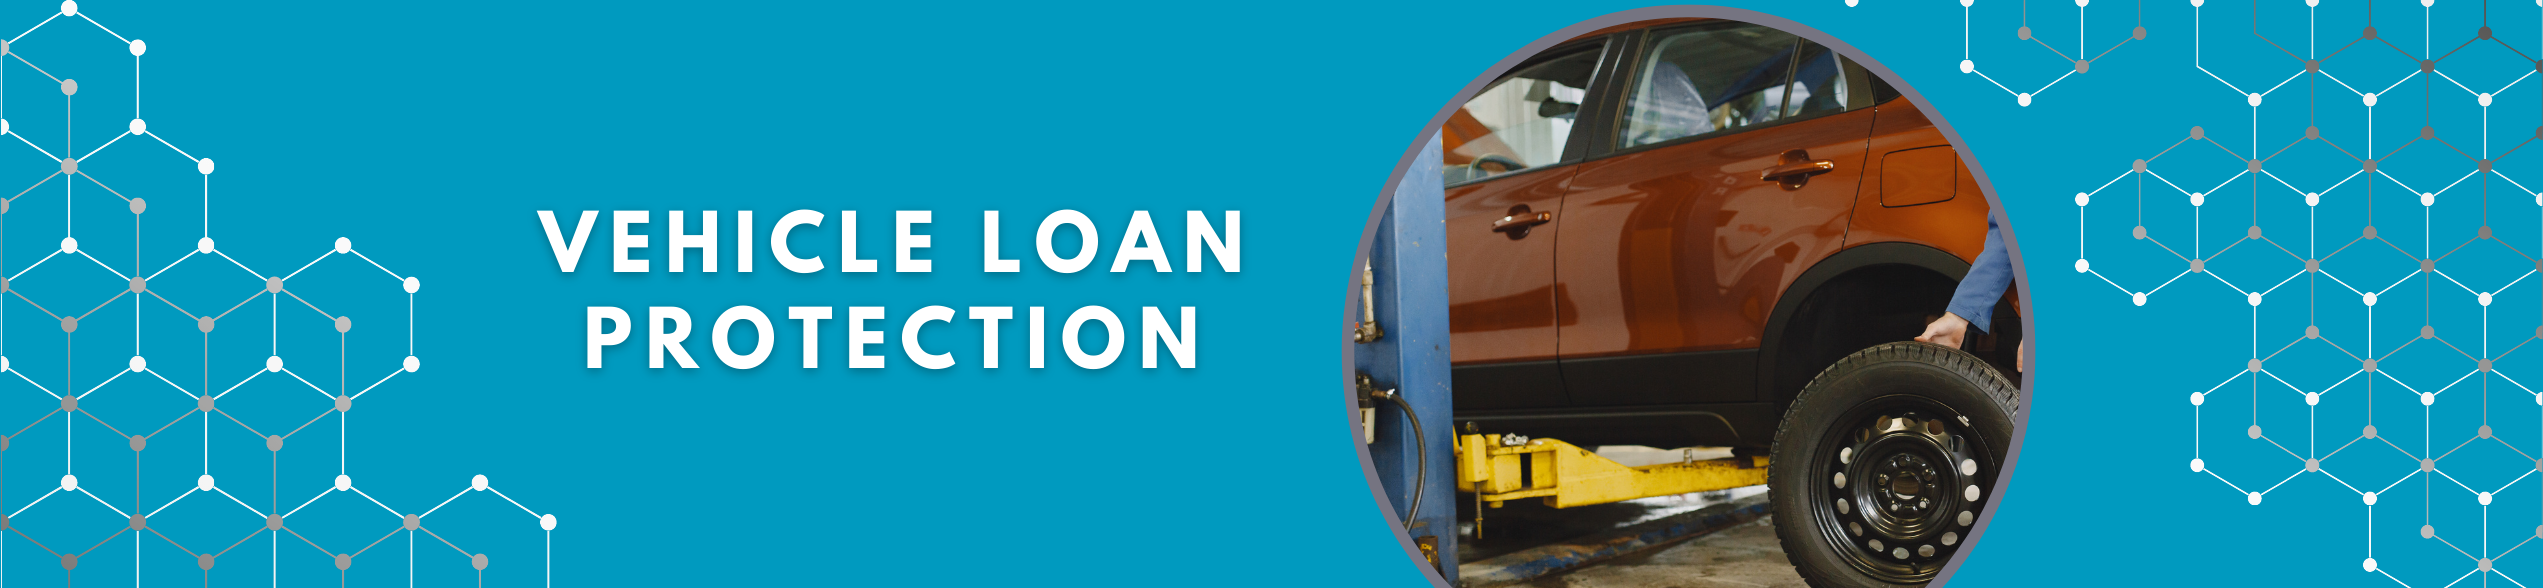 Protect your vehicle loan with our affordable options